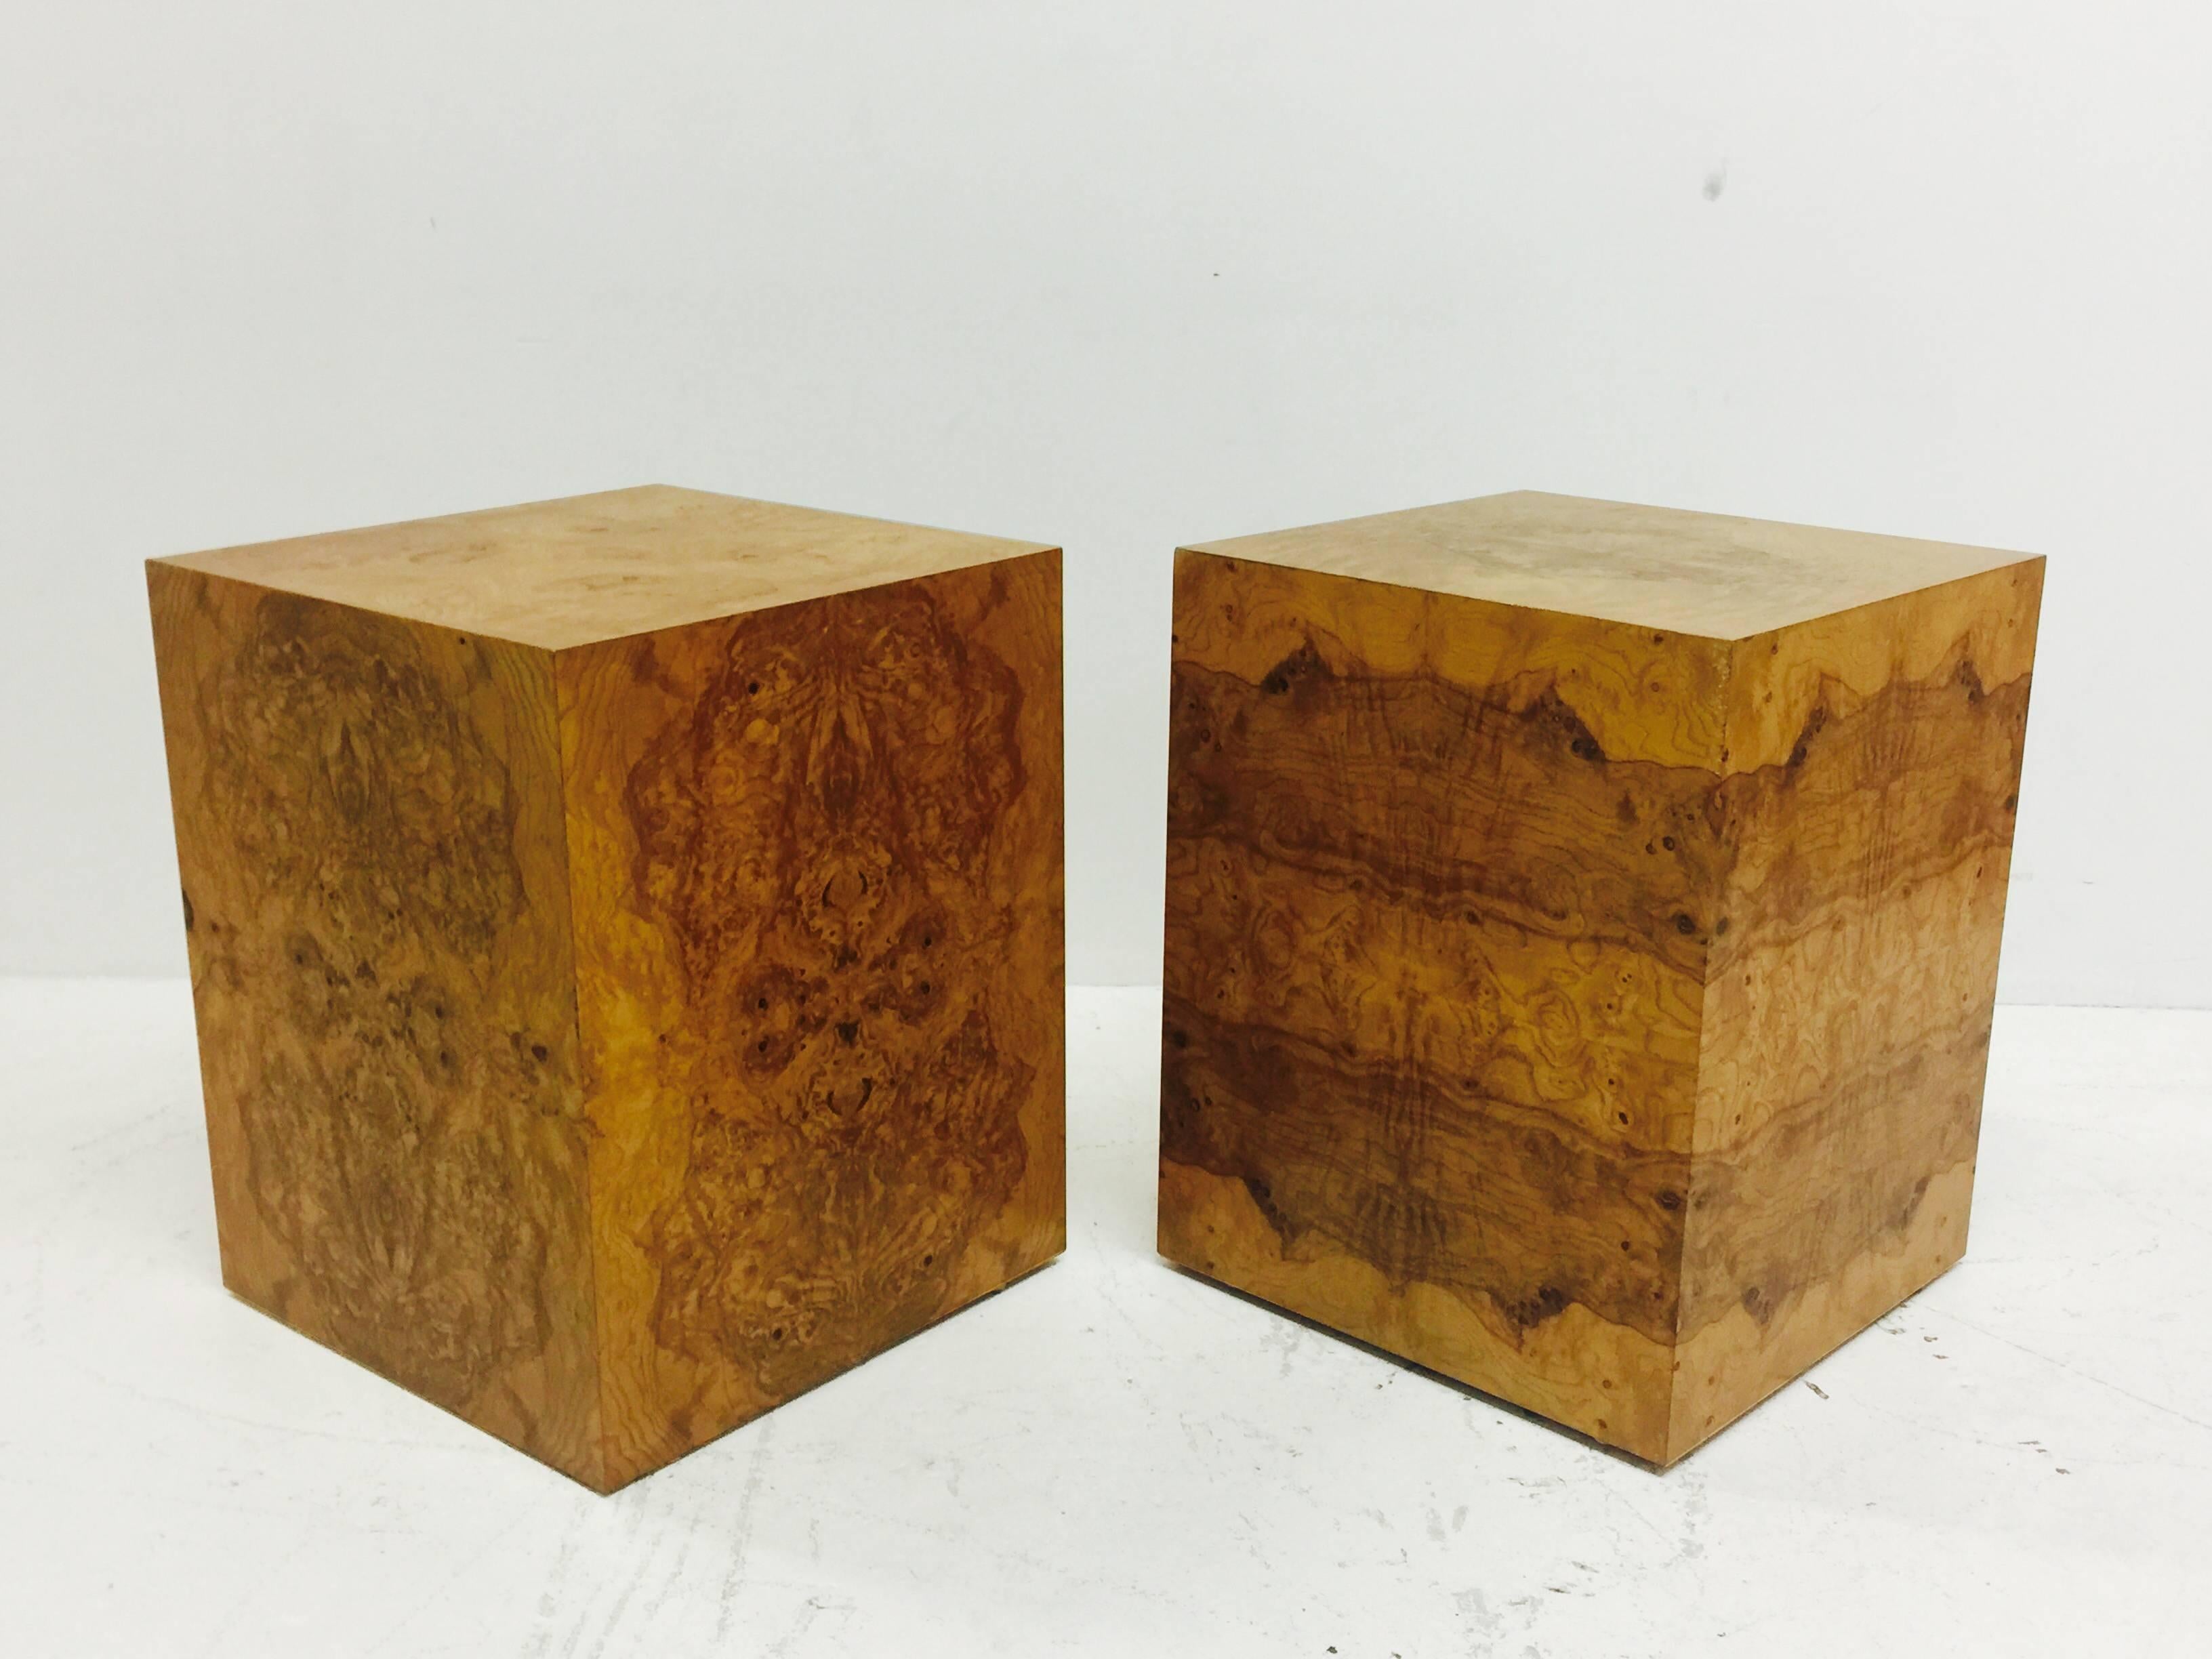 Pair of burl wood cubes by Milo Baughman. These can be used as side tables or pedestals. Does need refinishing.

Dimensions: 21" W x 21" D x 26" T.